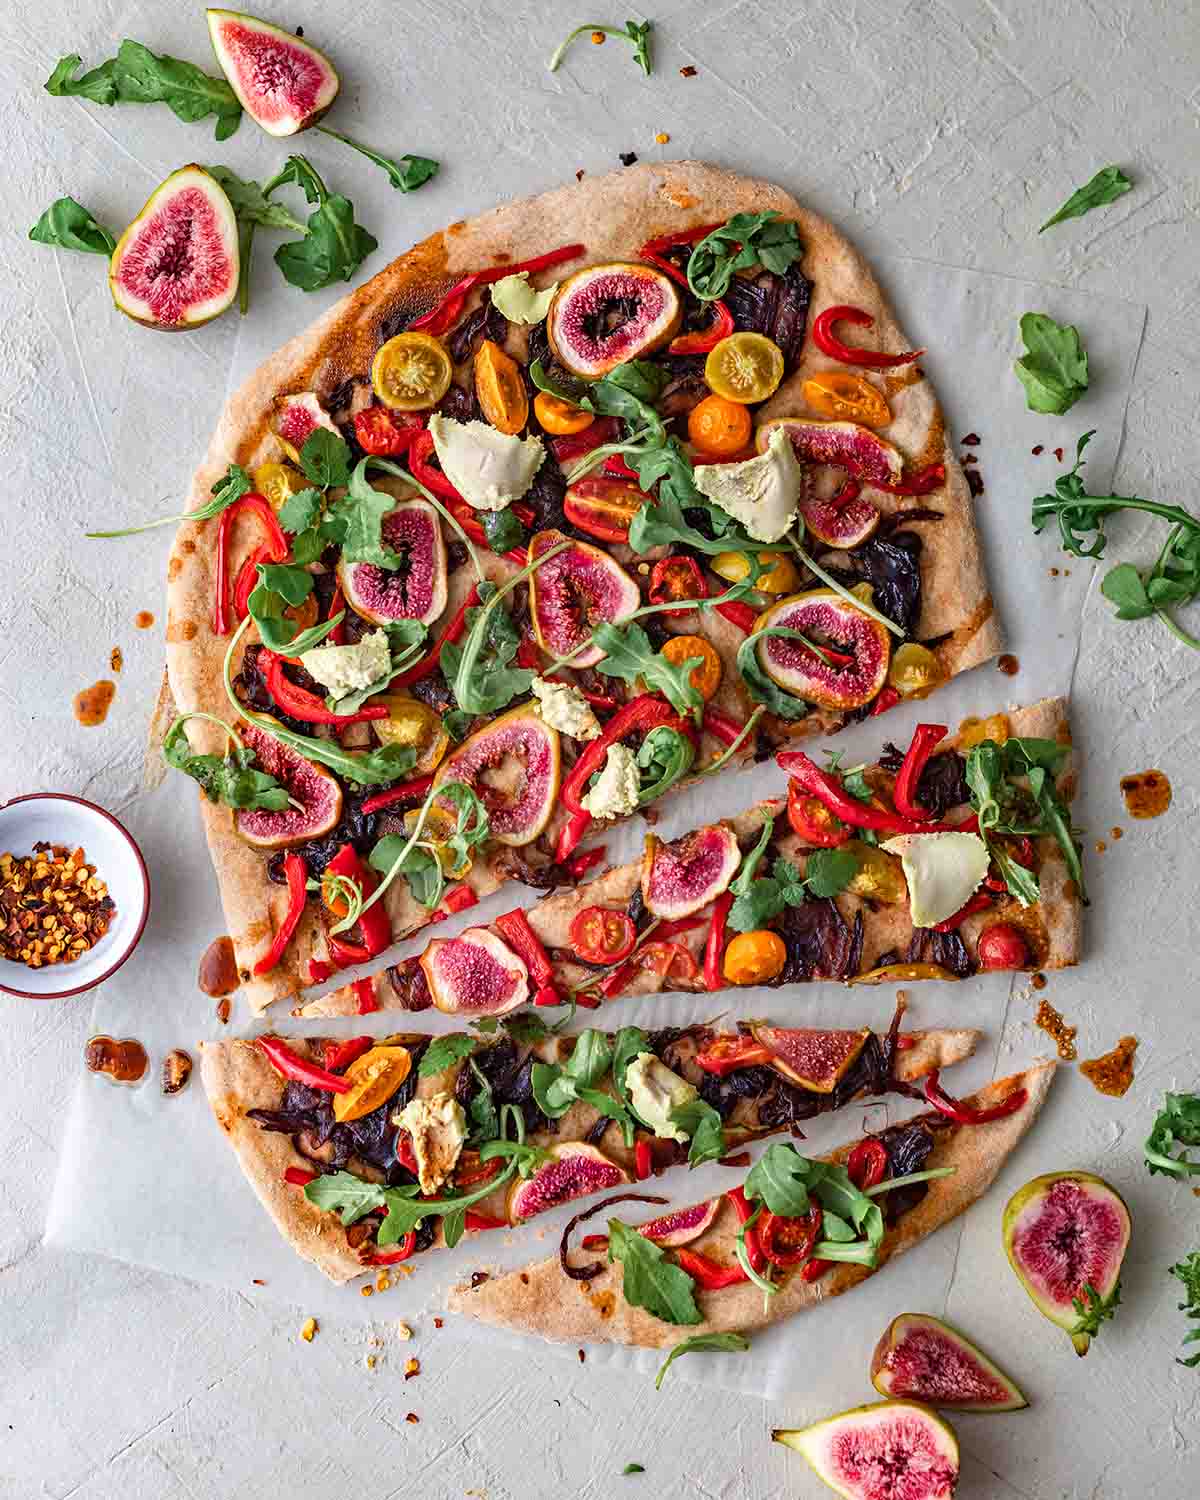 Large fig and caramelized onion pizza with bright toppings on sheet of baking paper. Three slices are cut out of pizza.